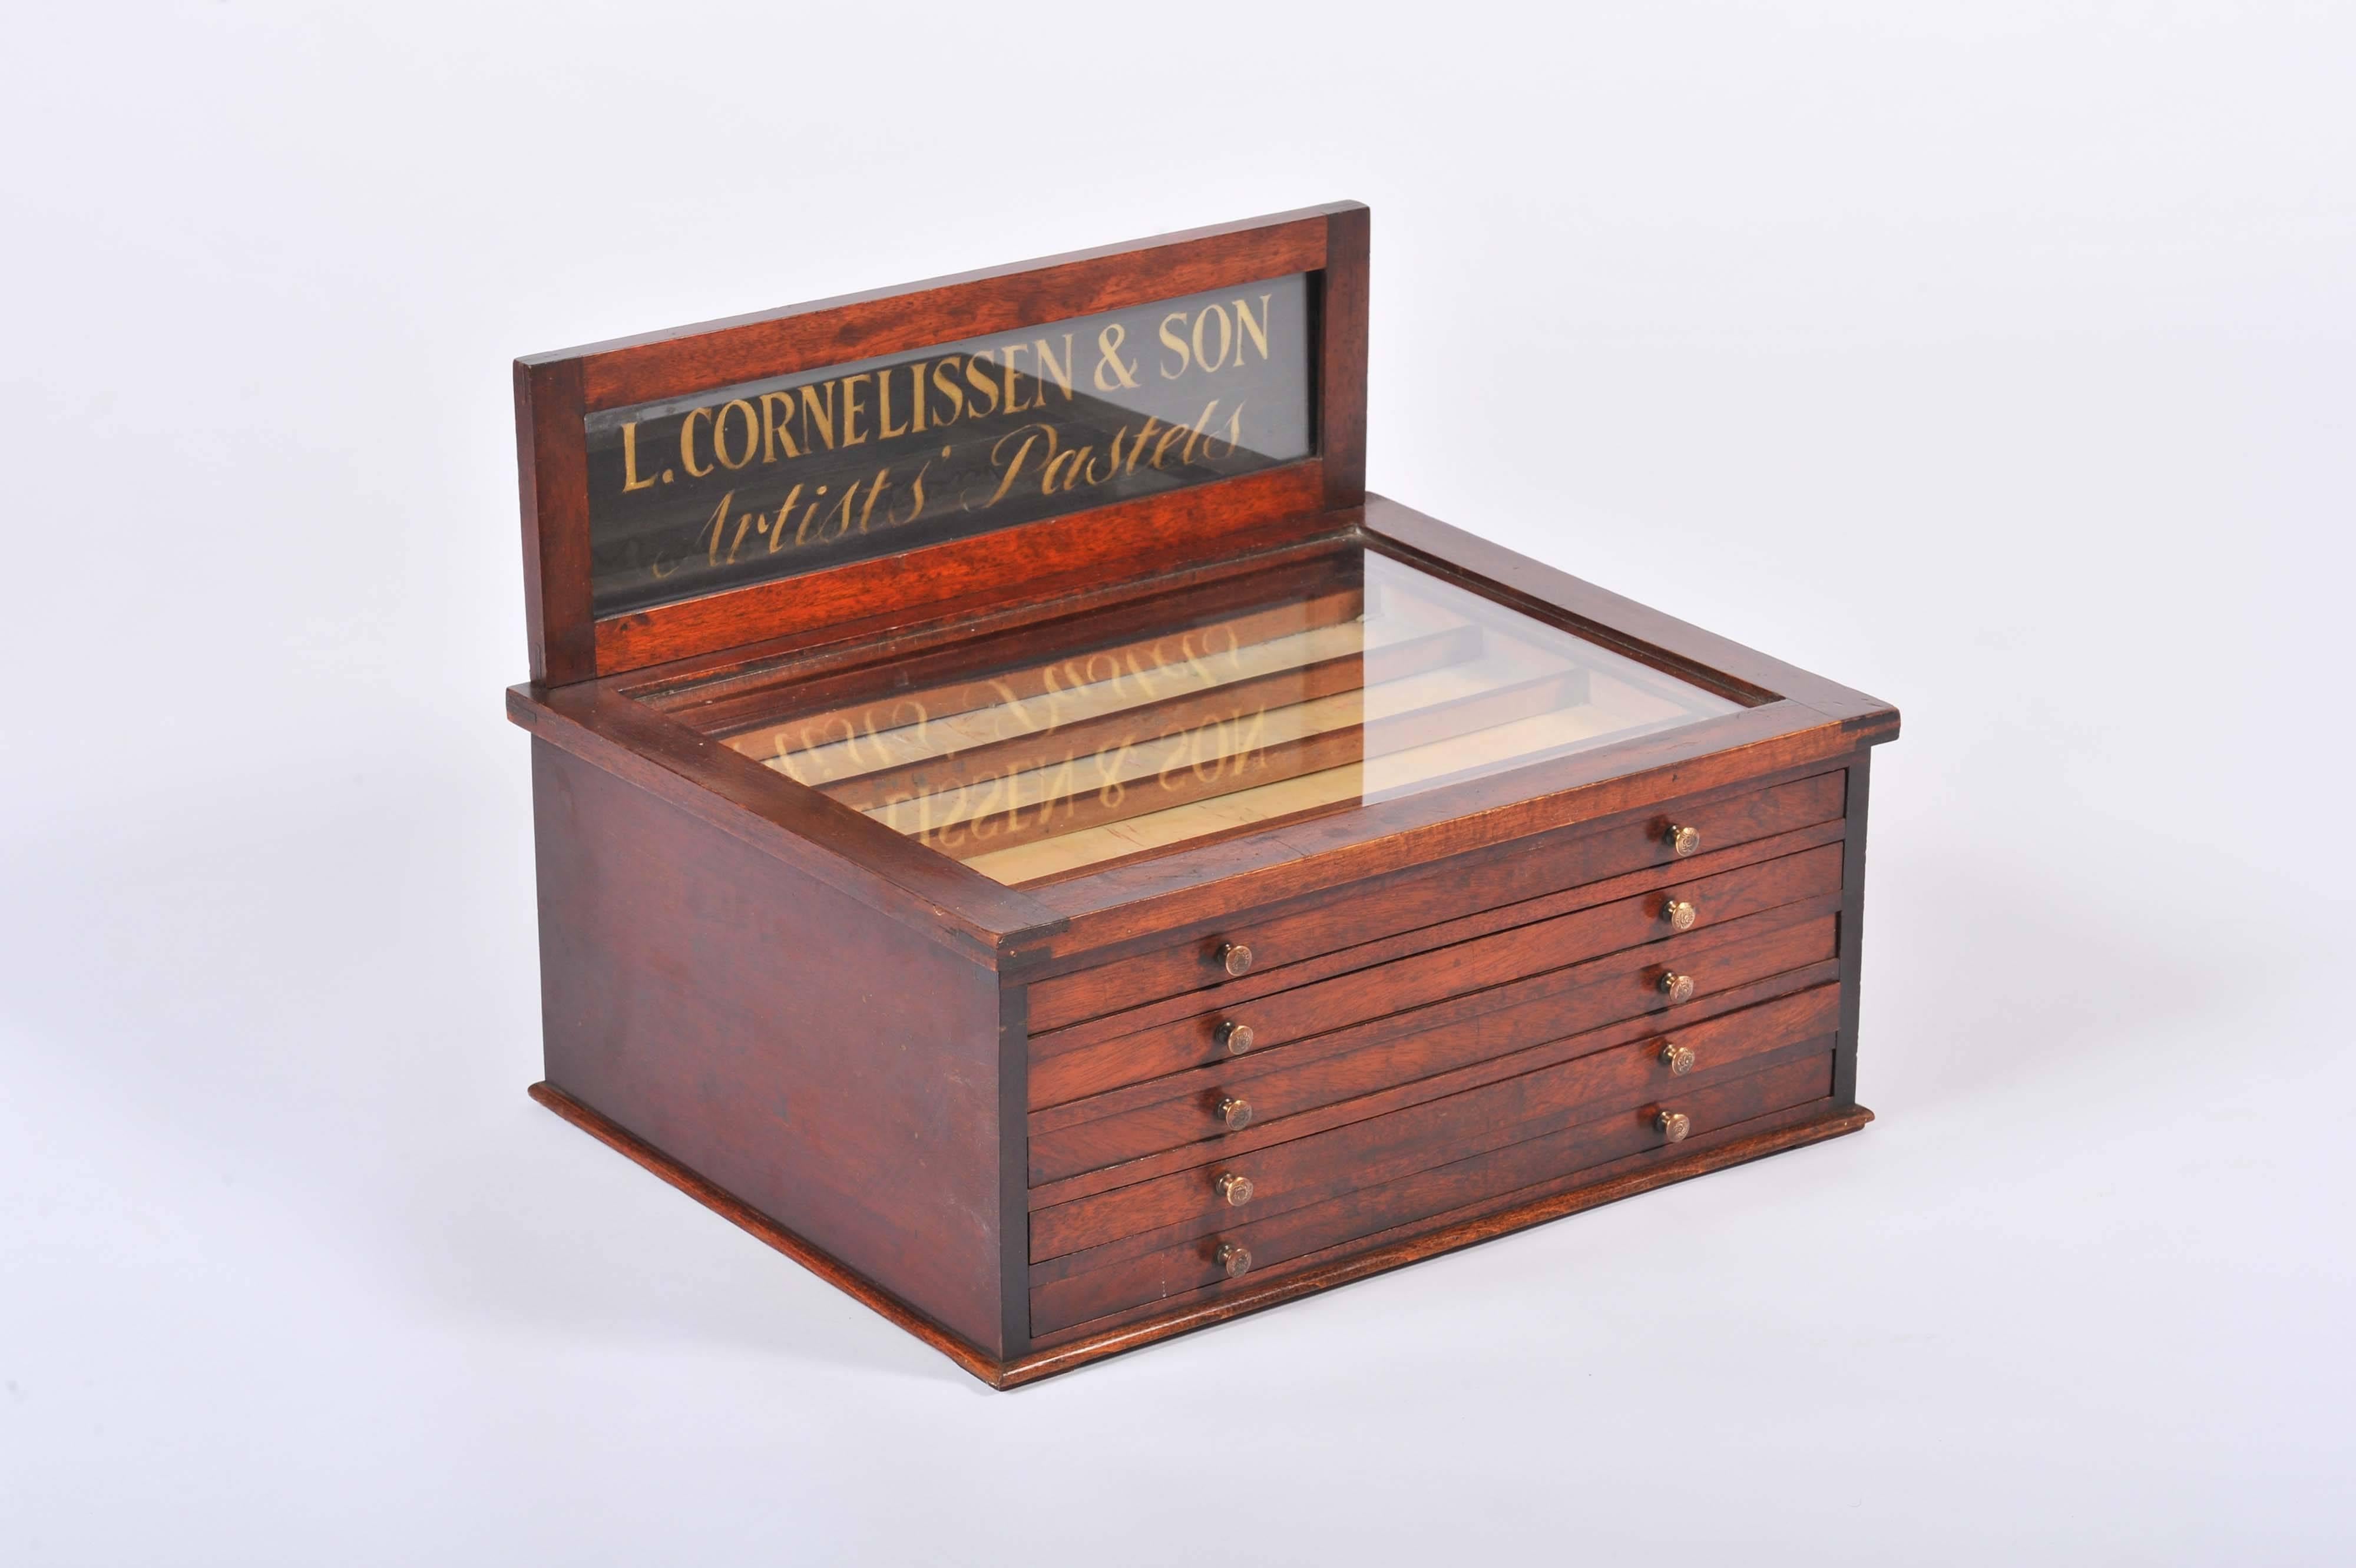 A beautiful antique wooden artist's pastels display cabinet ascribed to the renowned Victorian artist supply shop L. Cornelissen & Son, London. 

The cabinet contains five drawers, with each drawer divided into Sub-compartments, along with a glass